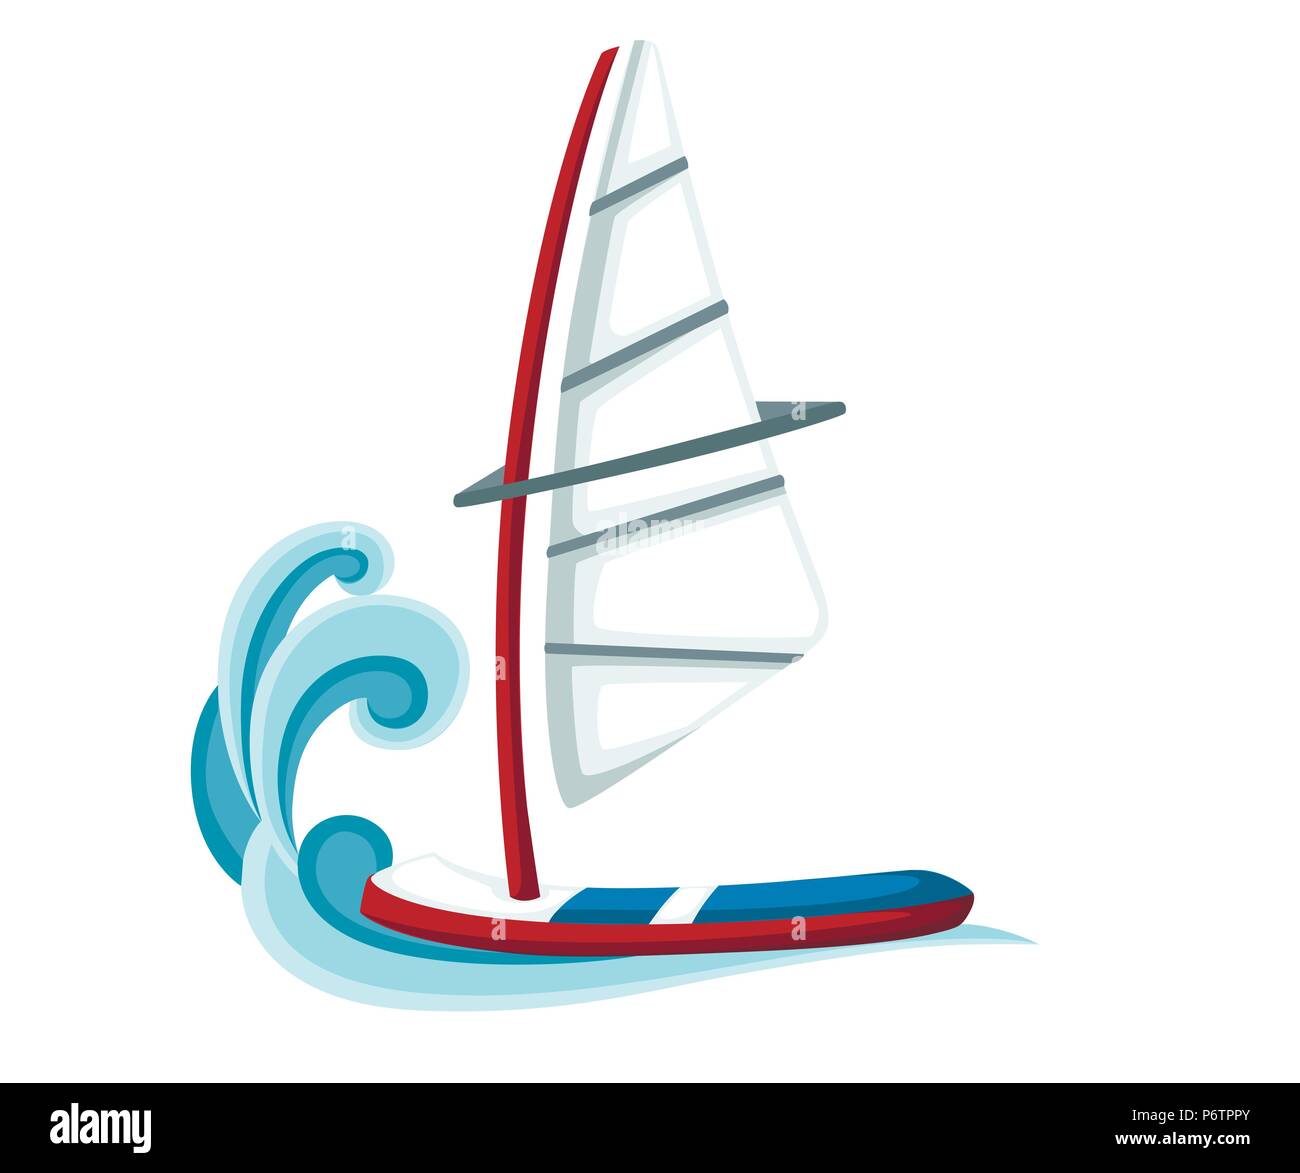 Cartoon sailing board on water. Equipment for windsurfing. Sailboard vector illustration isolated on white background. Stock Vector